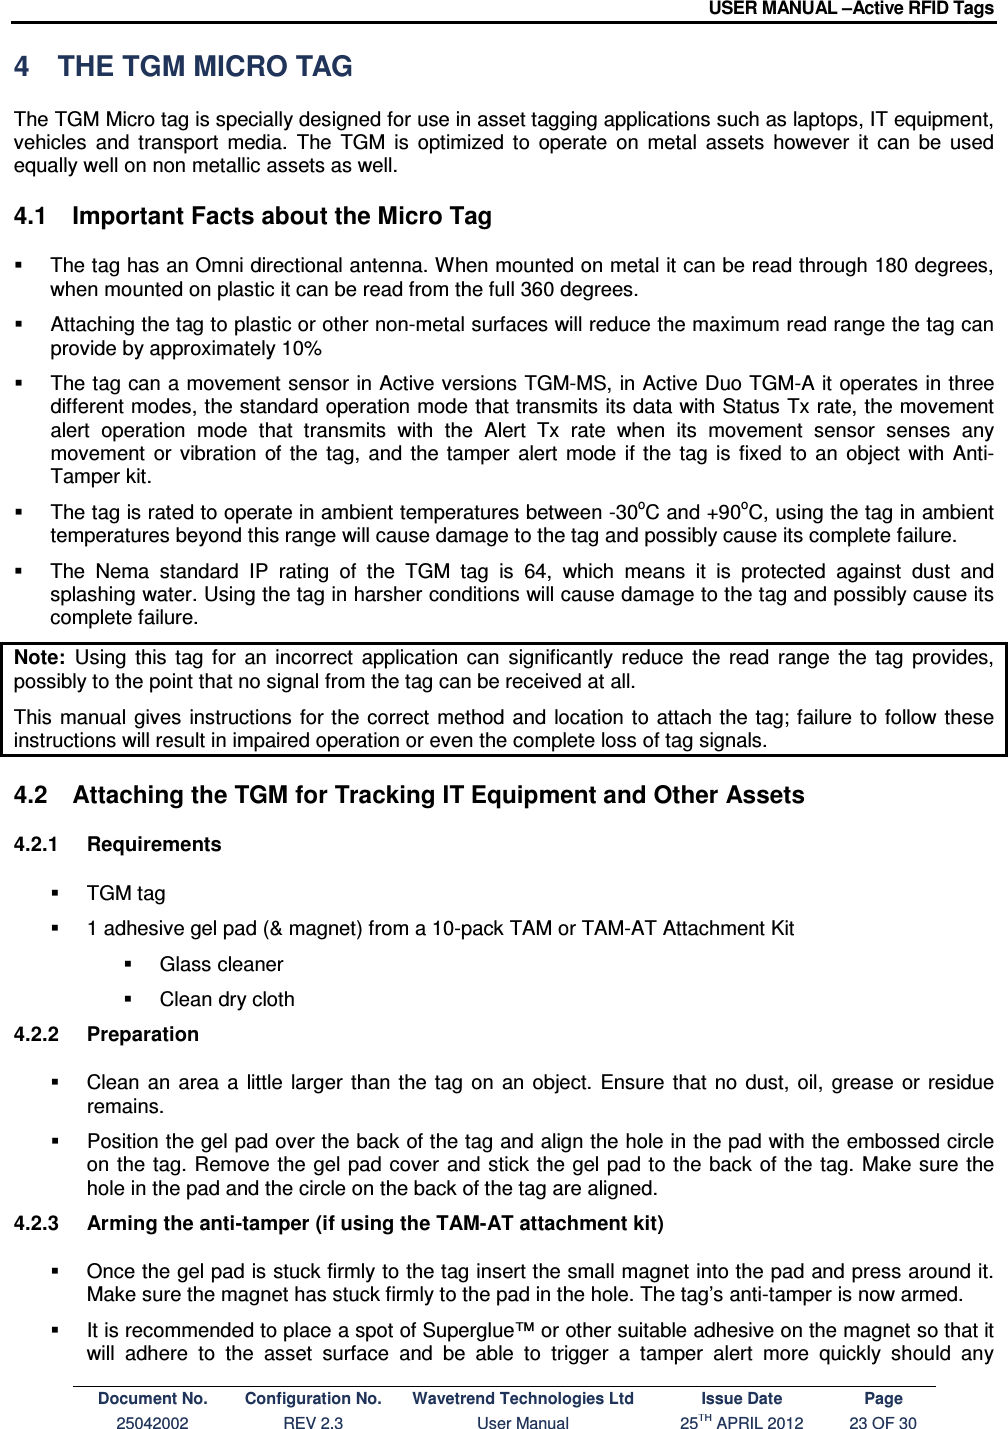 USER MANUAL –Active RFID Tags Document No. Configuration No. Wavetrend Technologies Ltd Issue Date Page 25042002  REV 2.3  User Manual  25TH APRIL 2012  23 OF 30  4  THE TGM MICRO TAG The TGM Micro tag is specially designed for use in asset tagging applications such as laptops, IT equipment, vehicles  and  transport  media.  The  TGM  is  optimized  to  operate  on  metal  assets  however  it  can  be  used equally well on non metallic assets as well. 4.1  Important Facts about the Micro Tag   The tag has an Omni directional antenna. When mounted on metal it can be read through 180 degrees, when mounted on plastic it can be read from the full 360 degrees.   Attaching the tag to plastic or other non-metal surfaces will reduce the maximum read range the tag can provide by approximately 10%   The tag can a movement sensor in Active versions TGM-MS, in Active Duo TGM-A it operates in three different modes, the standard operation mode that transmits its data with Status Tx rate, the movement alert  operation  mode  that  transmits  with  the  Alert  Tx  rate  when  its  movement  sensor  senses  any movement  or  vibration  of  the  tag,  and  the  tamper  alert  mode  if  the  tag  is  fixed  to  an  object  with  Anti-Tamper kit.   The tag is rated to operate in ambient temperatures between -30oC and +90oC, using the tag in ambient temperatures beyond this range will cause damage to the tag and possibly cause its complete failure.   The  Nema  standard  IP  rating  of  the  TGM  tag  is  64,  which  means  it  is  protected  against  dust  and splashing water. Using the tag in harsher conditions will cause damage to the tag and possibly cause its complete failure. Note:  Using  this  tag  for  an  incorrect  application  can  significantly  reduce  the  read  range  the  tag  provides, possibly to the point that no signal from the tag can be received at all. This  manual  gives  instructions  for the correct method  and  location to  attach the tag; failure to  follow these instructions will result in impaired operation or even the complete loss of tag signals.  4.2  Attaching the TGM for Tracking IT Equipment and Other Assets 4.2.1  Requirements   TGM tag   1 adhesive gel pad (&amp; magnet) from a 10-pack TAM or TAM-AT Attachment Kit    Glass cleaner   Clean dry cloth 4.2.2  Preparation   Clean  an  area  a  little  larger  than  the  tag  on an object.  Ensure  that  no  dust,  oil,  grease  or  residue remains.   Position the gel pad over the back of the tag and align the hole in the pad with the embossed circle on the tag. Remove the  gel pad cover  and stick the gel pad to the back of  the  tag. Make sure the hole in the pad and the circle on the back of the tag are aligned. 4.2.3  Arming the anti-tamper (if using the TAM-AT attachment kit)   Once the gel pad is stuck firmly to the tag insert the small magnet into the pad and press around it. Make sure the magnet has stuck firmly to the pad in the hole. The tag’s anti-tamper is now armed.   It is recommended to place a spot of Superglue™ or other suitable adhesive on the magnet so that it will  adhere  to  the  asset  surface  and  be  able  to  trigger  a  tamper  alert  more  quickly  should  any 